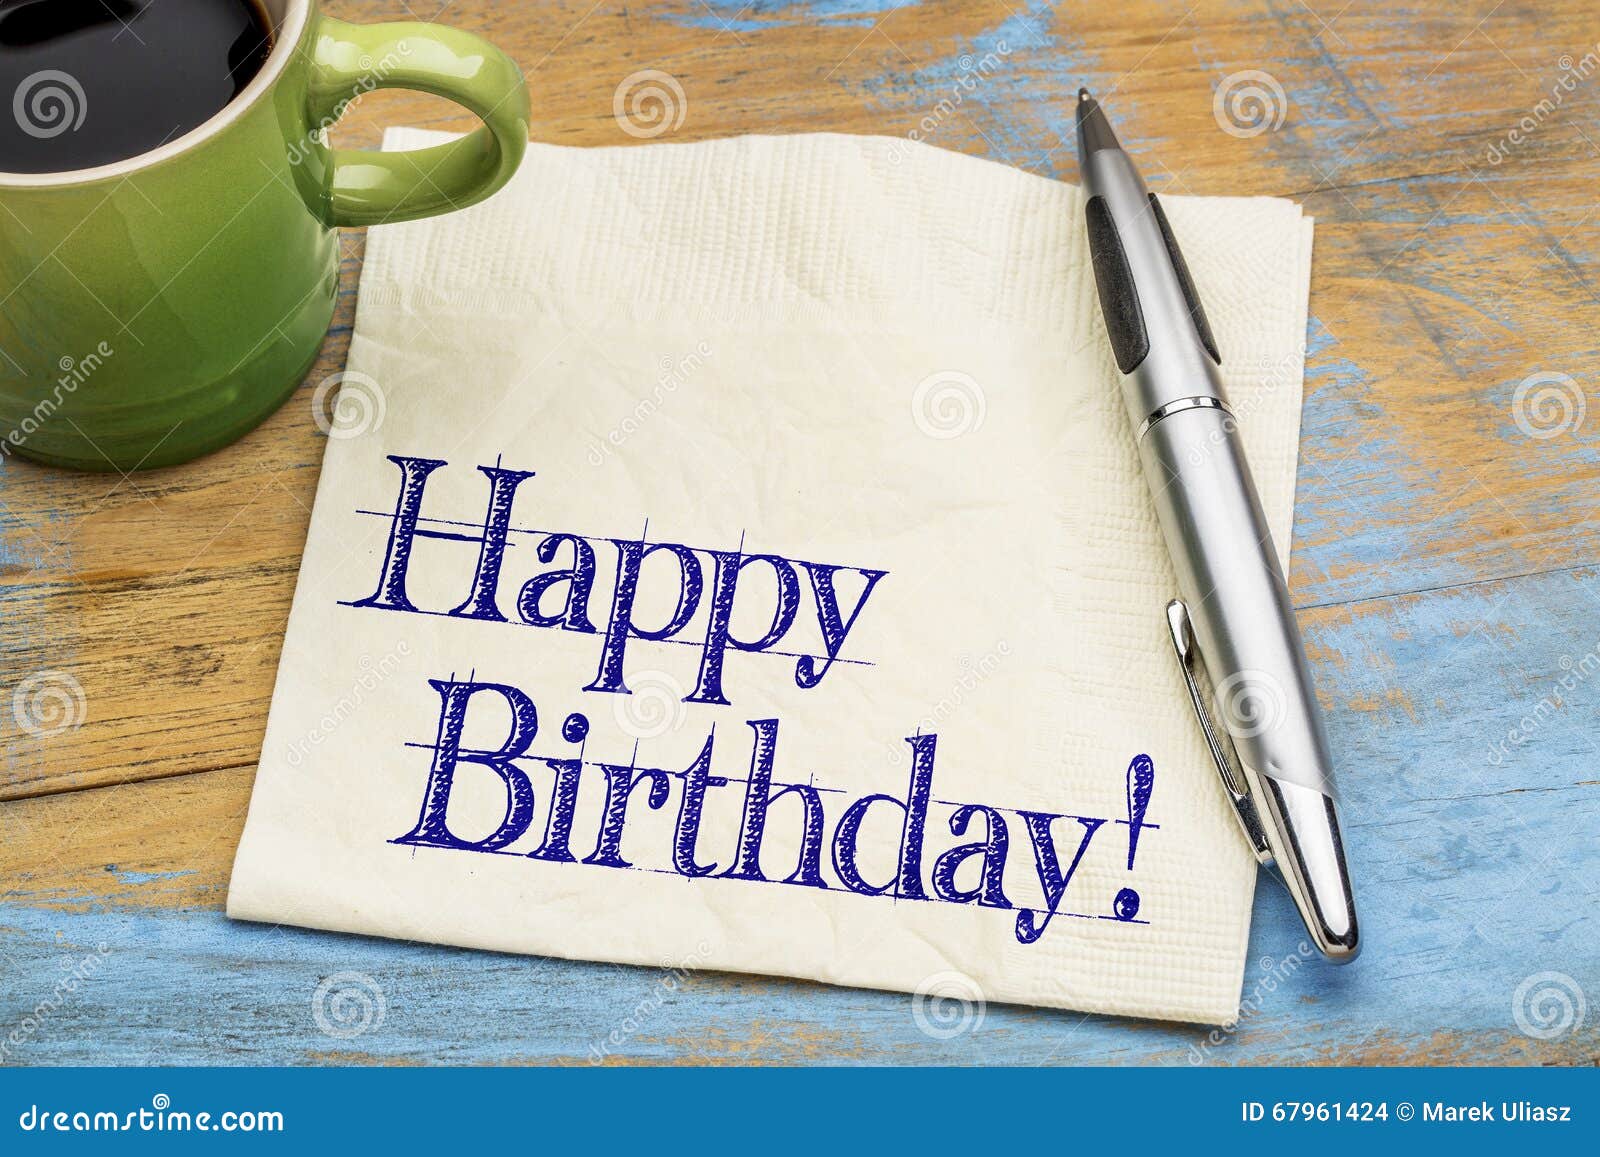 Happy Birthday Greetings on Napkin with Coffee Stock Photo - Image of ...